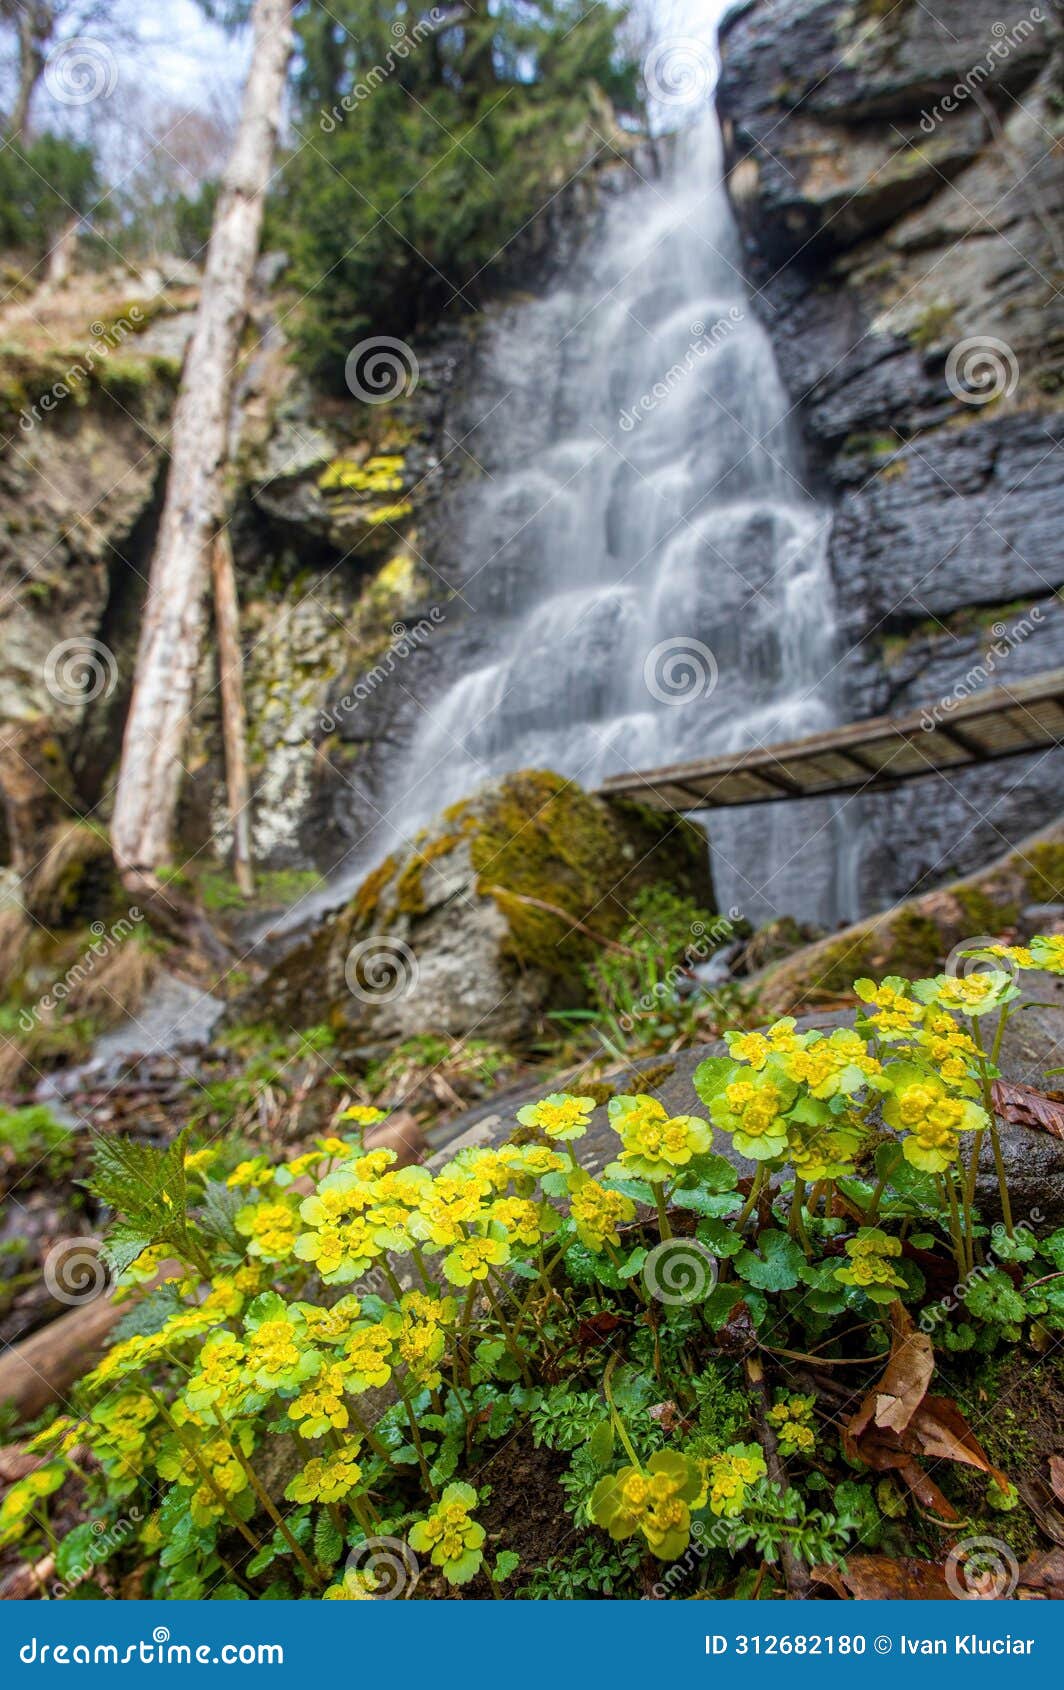 chrysosplenium alternifolium blooms in the wild in spring. in the background, a waterfall, water flowing over the rocks.